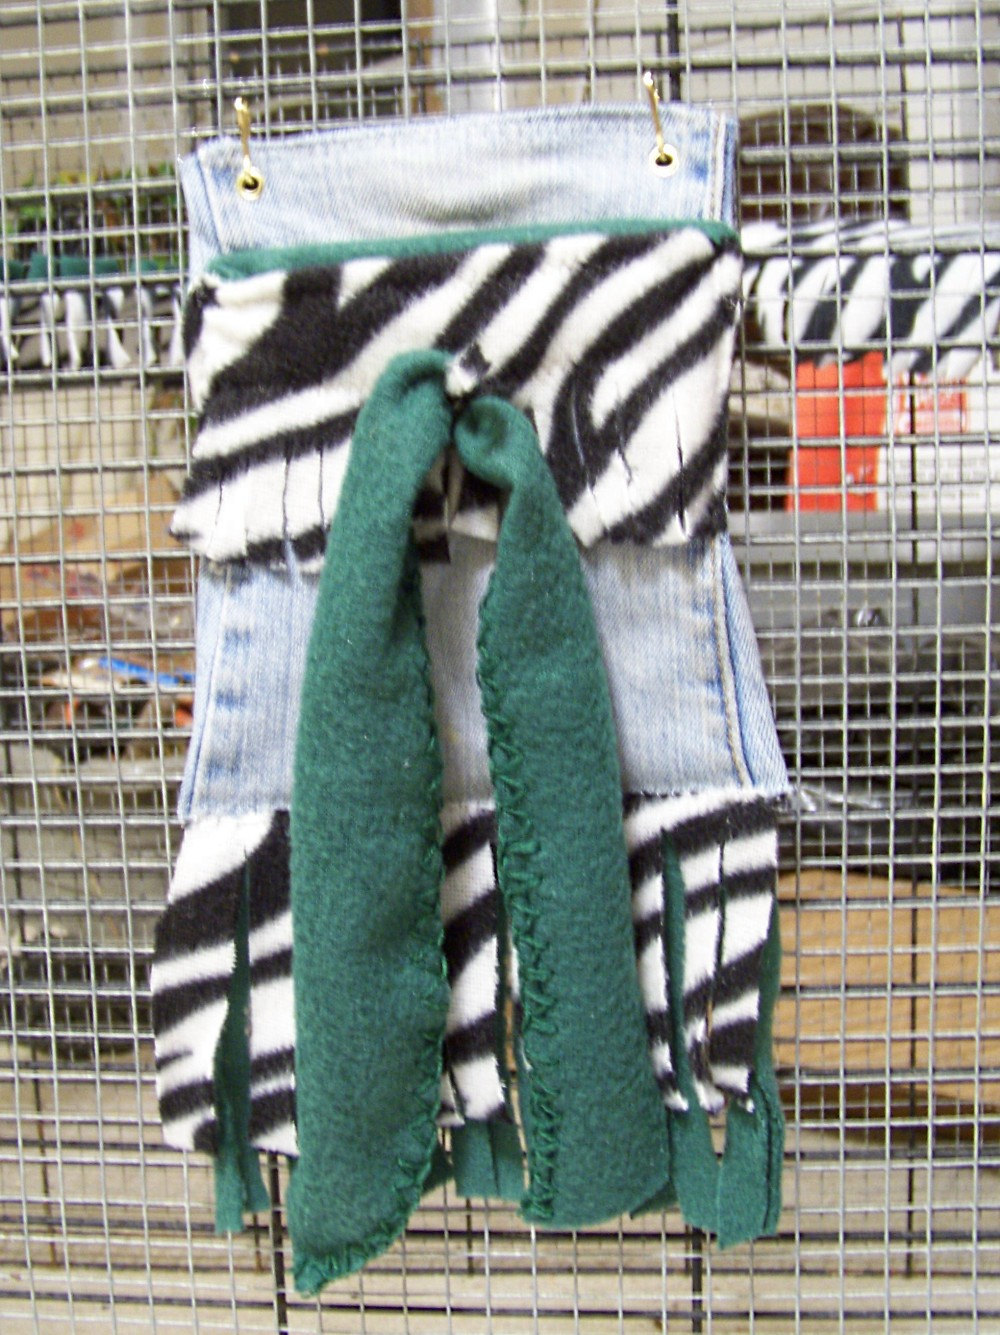 Cage And Bonding Bag Pouch For Small Pets - Denim, Green Fleece With Black And White Zebra Stripe Patterned Fleece - 6x6 Inches